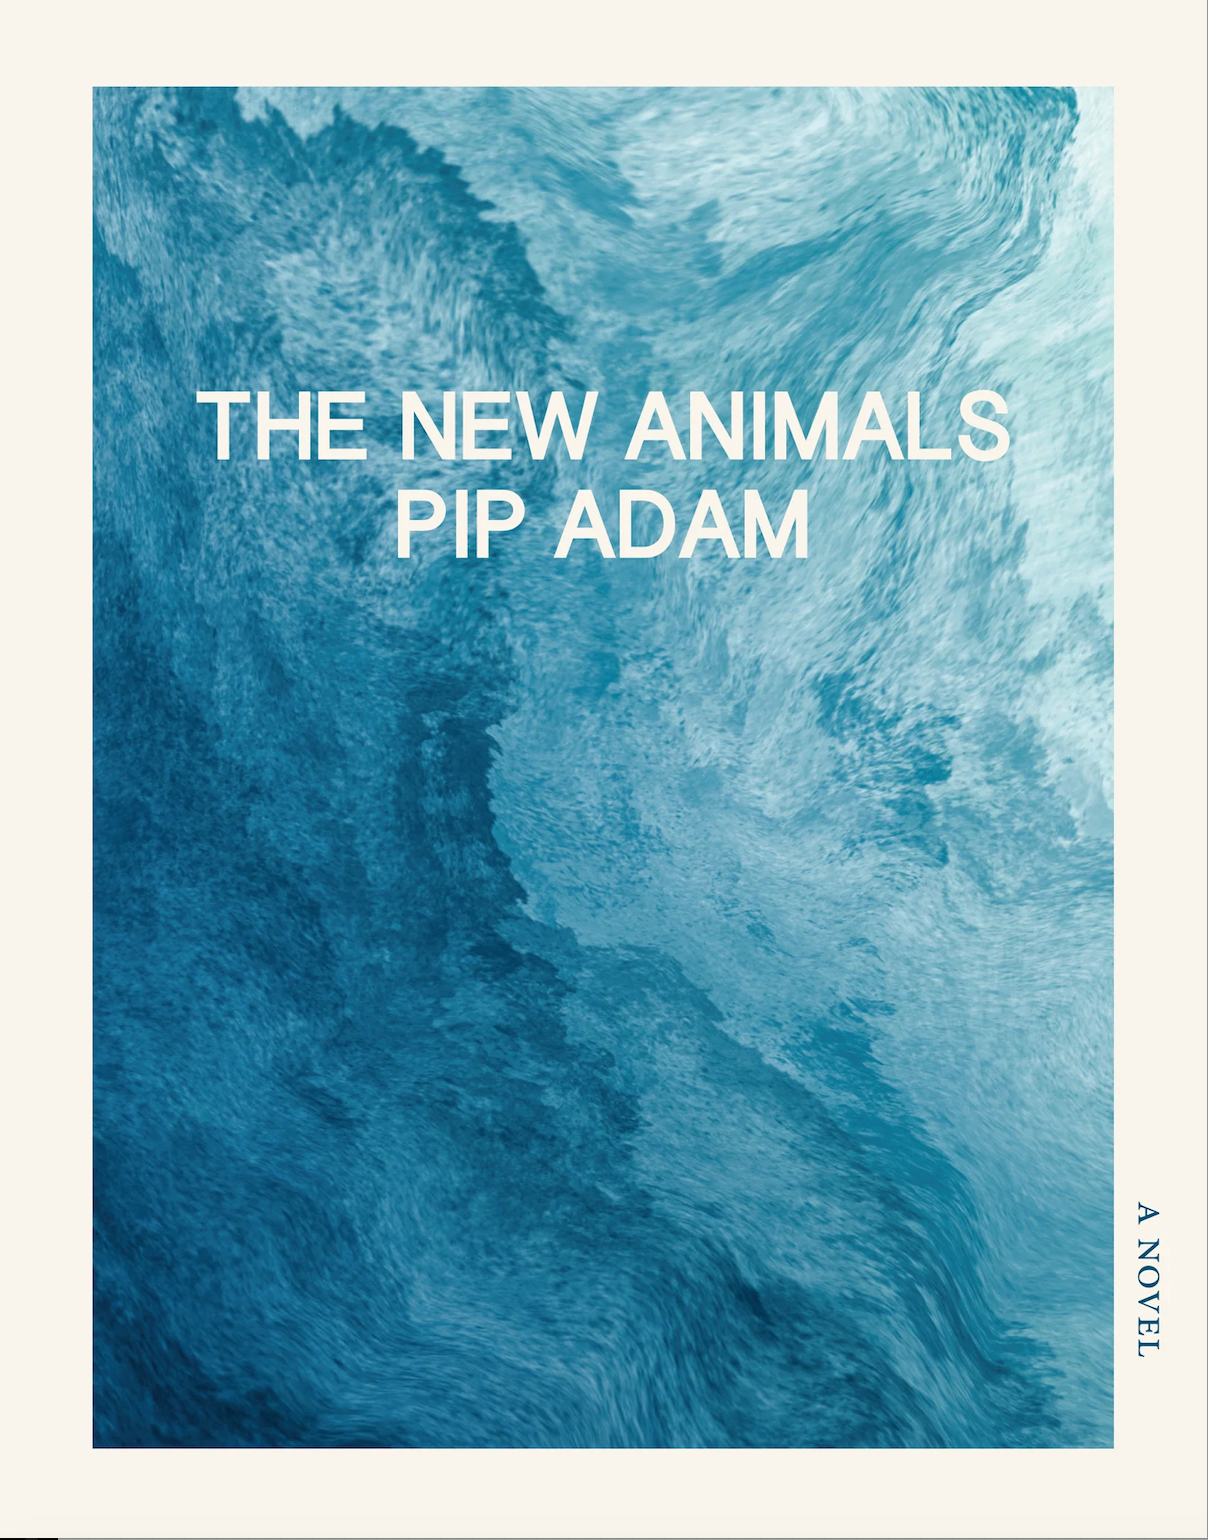 All the Waste in the World: On Pip Adam’s “The New Animals”